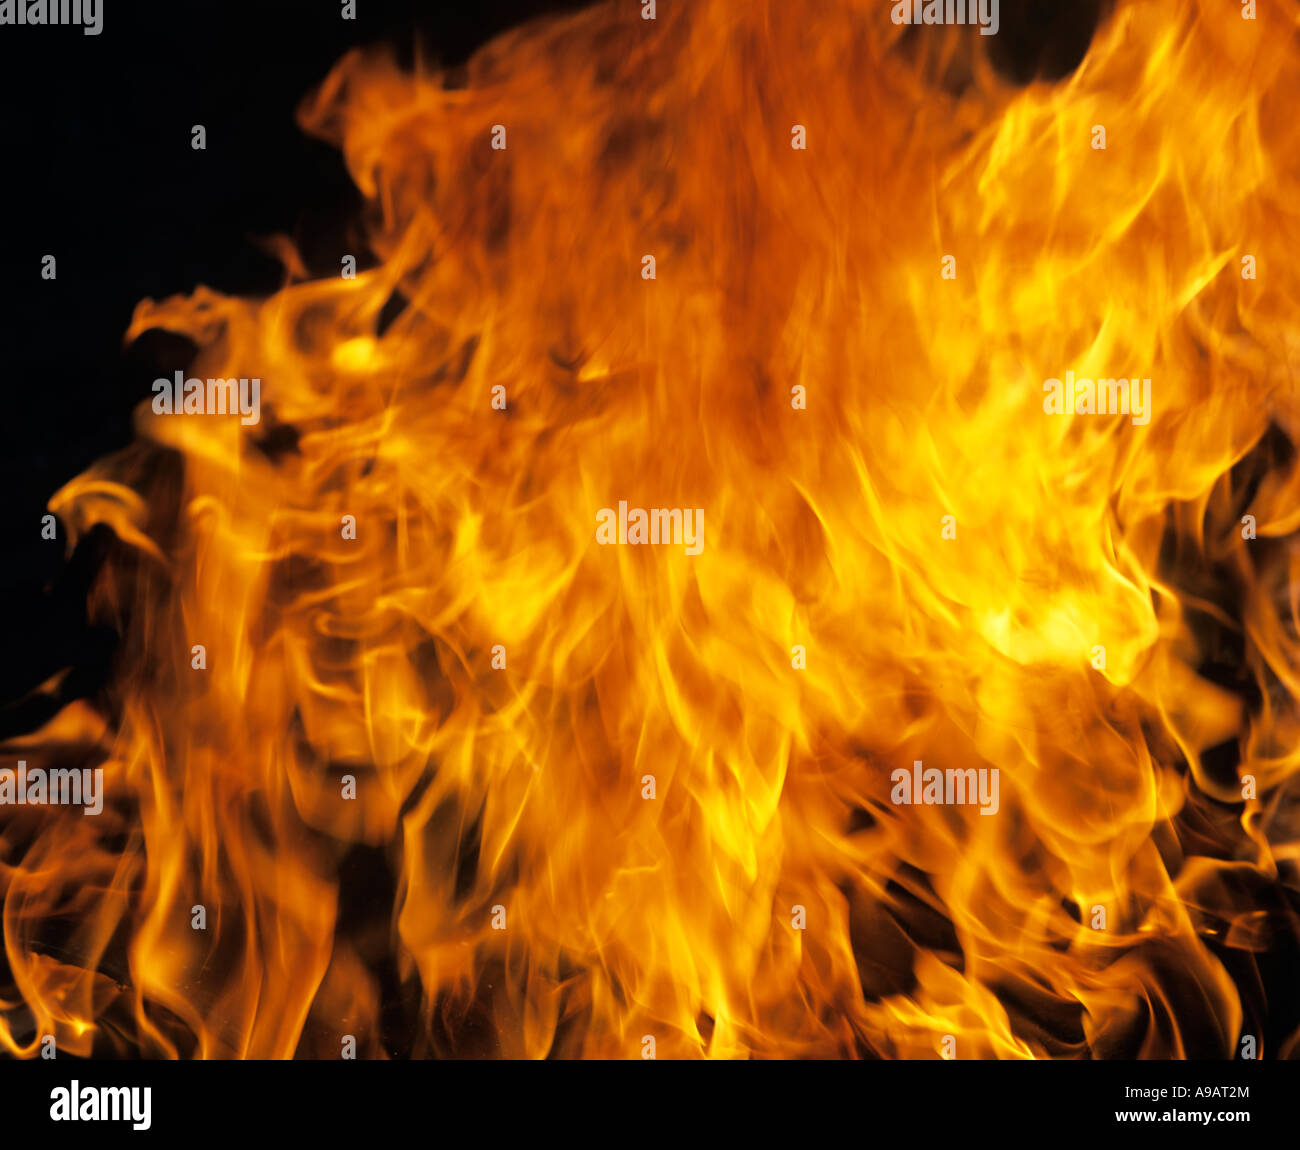 FIRE FLAMES ON BLACK BACKGROUND Stock Photo